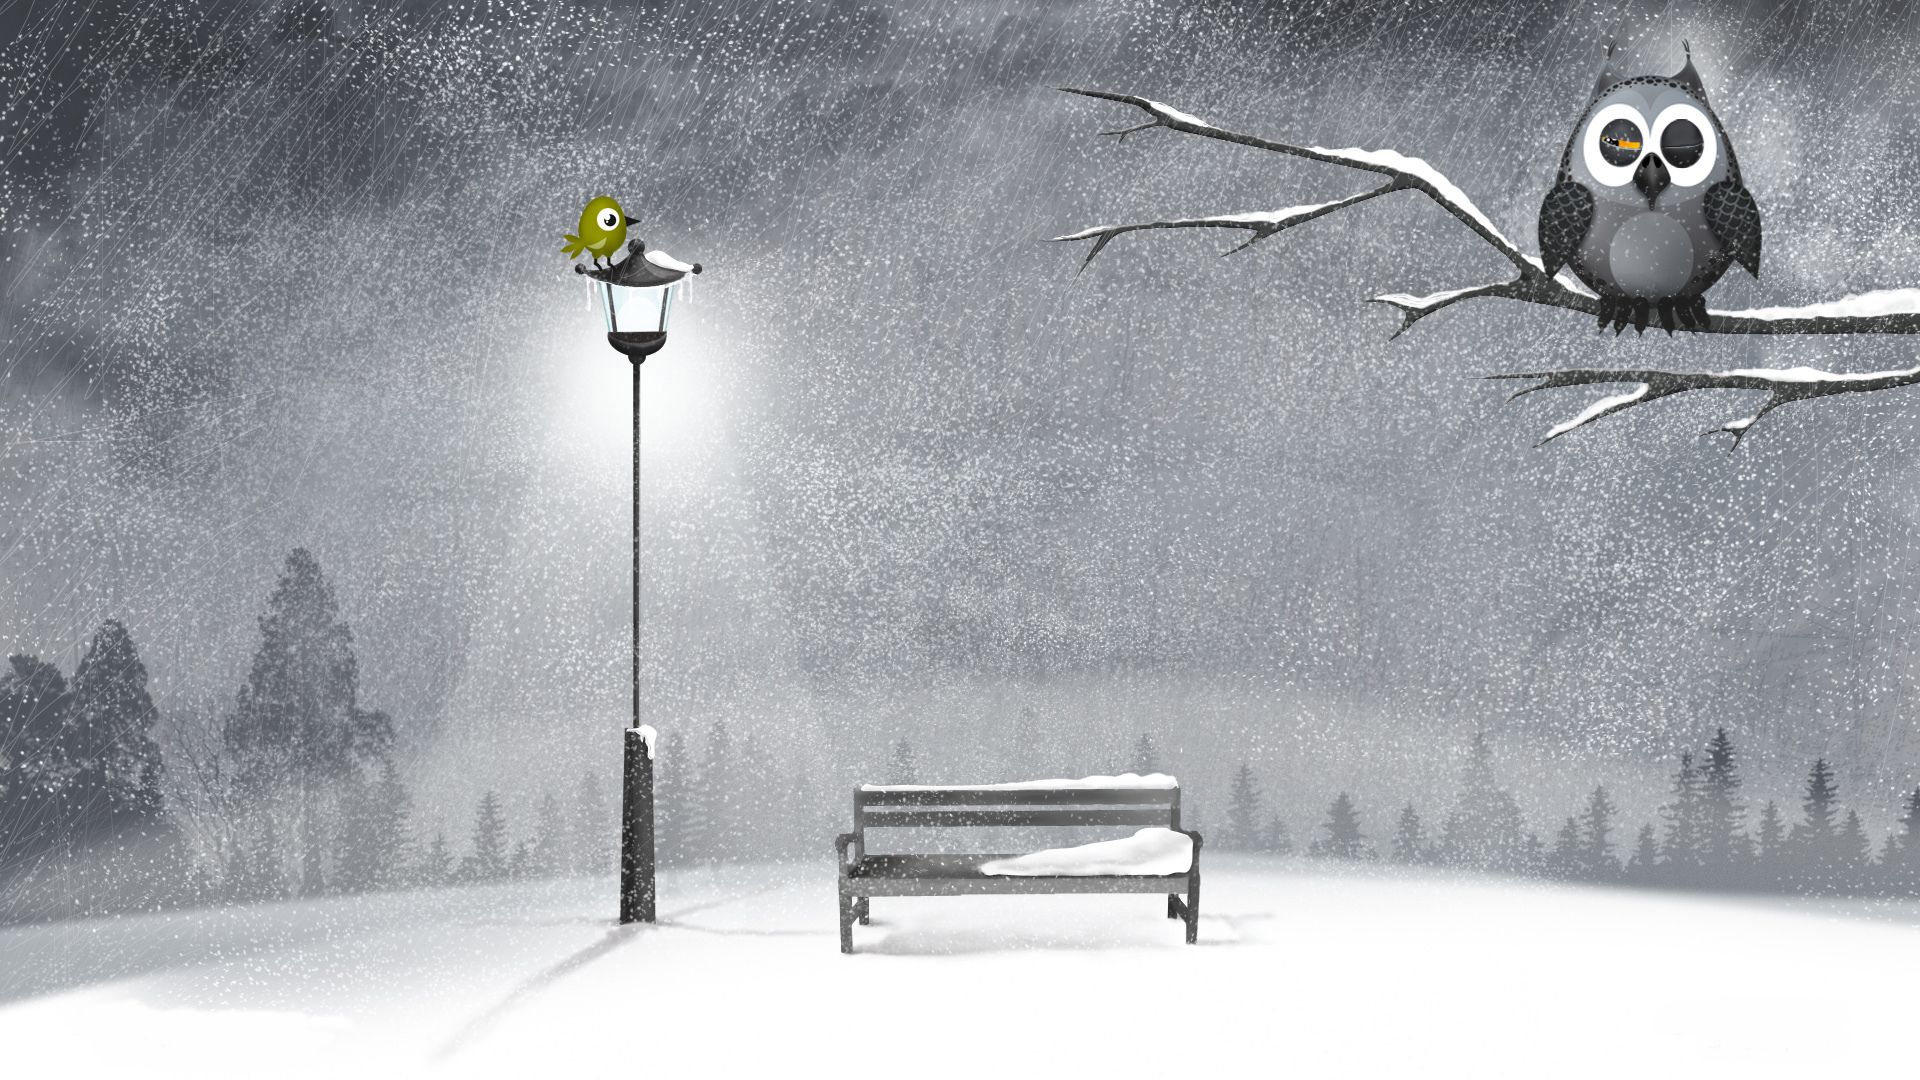 Vector Graphics Pictureque Vector Graphics High Quality Resolutions Winter Season Hd Photography Notebook Wal. Cartoon Wallpaper Hd, Snowfall Wallpaper, Painting